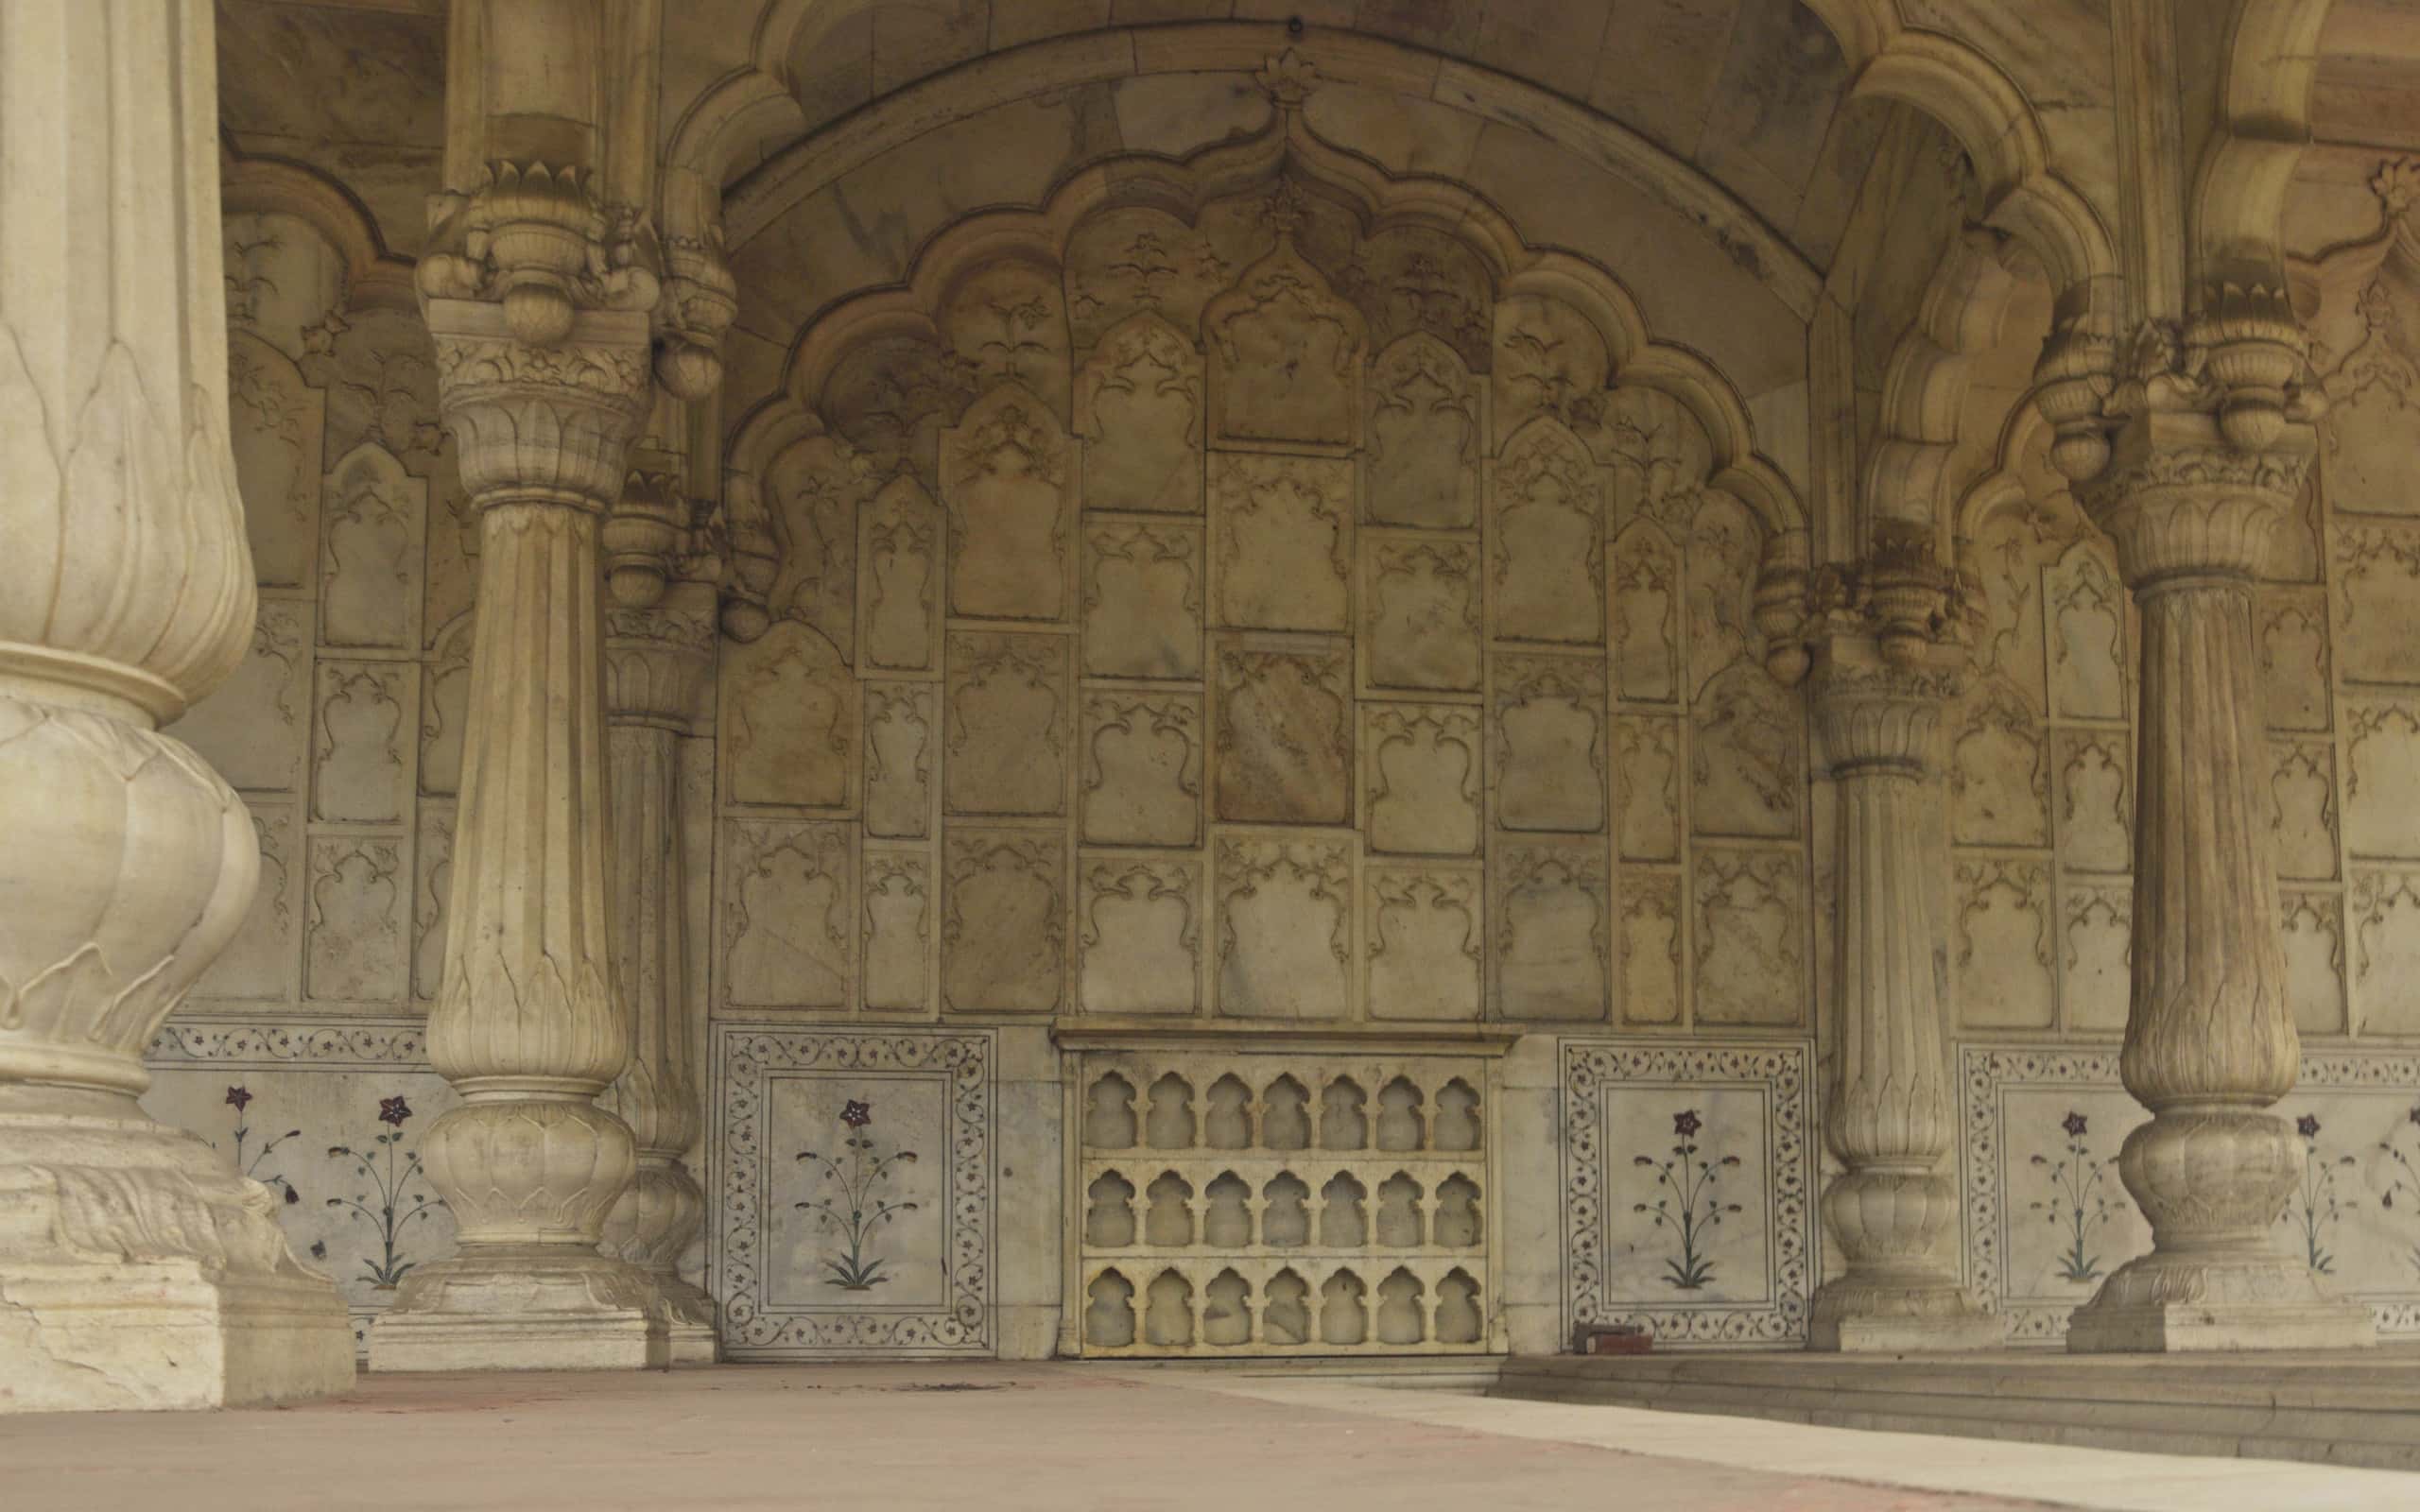 mughal era building inside unesco world heritage site, red fort, old delhi, india